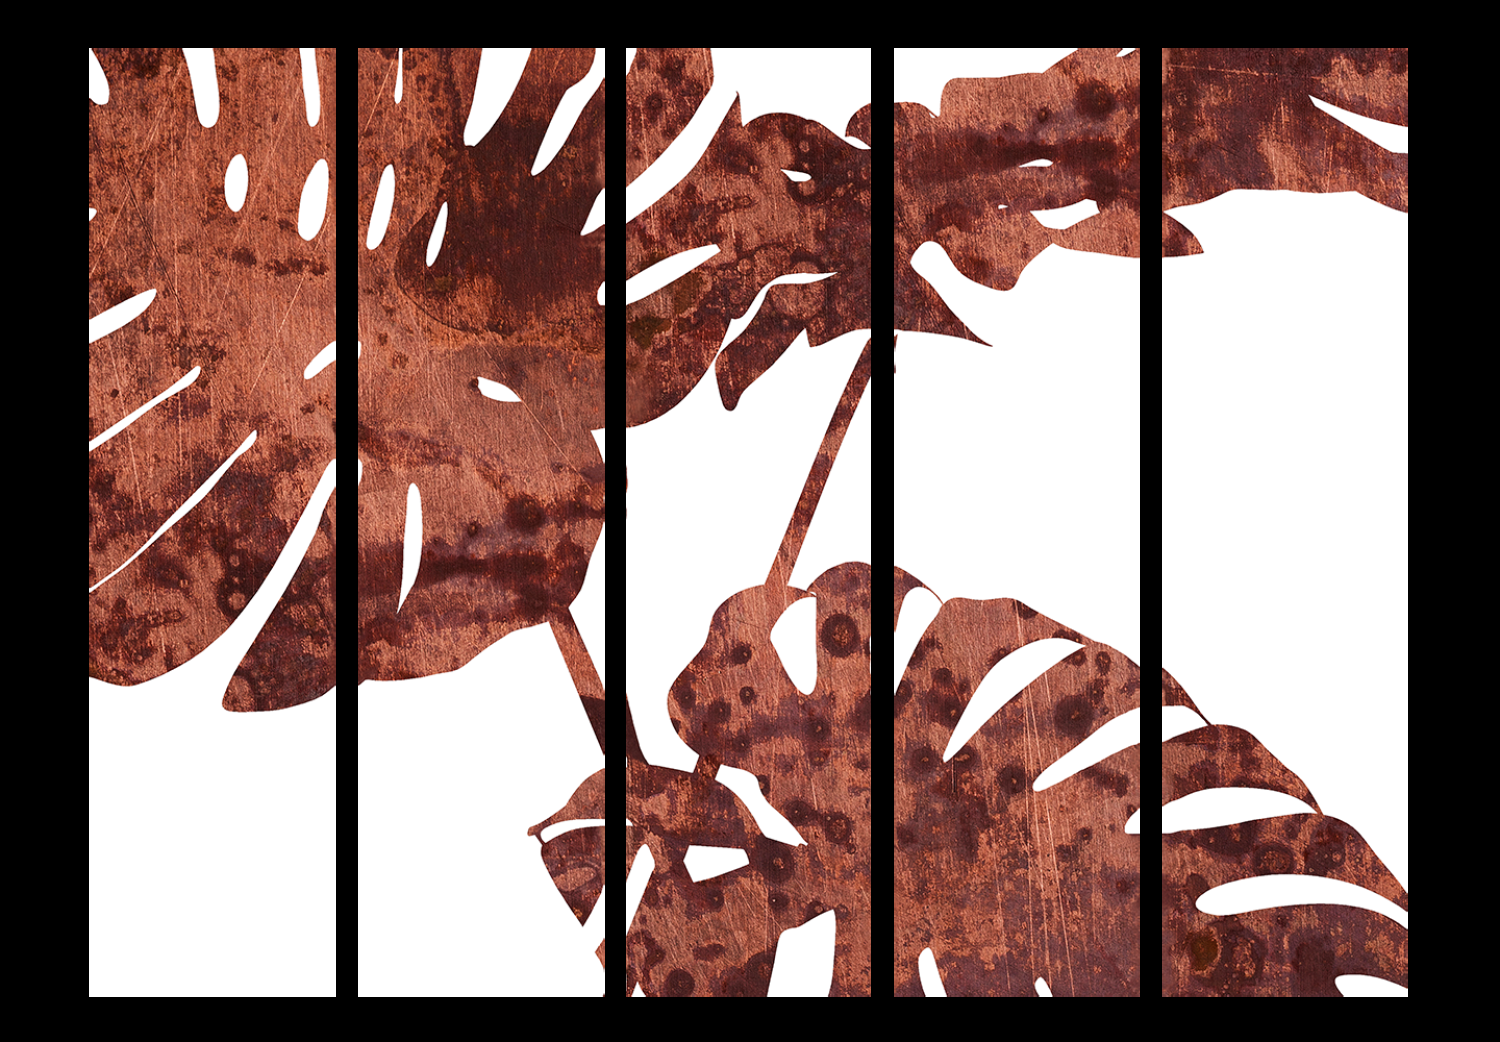 Room Divider Exquisite Monstera II (5-piece) - rusty leaves of a tropical plant